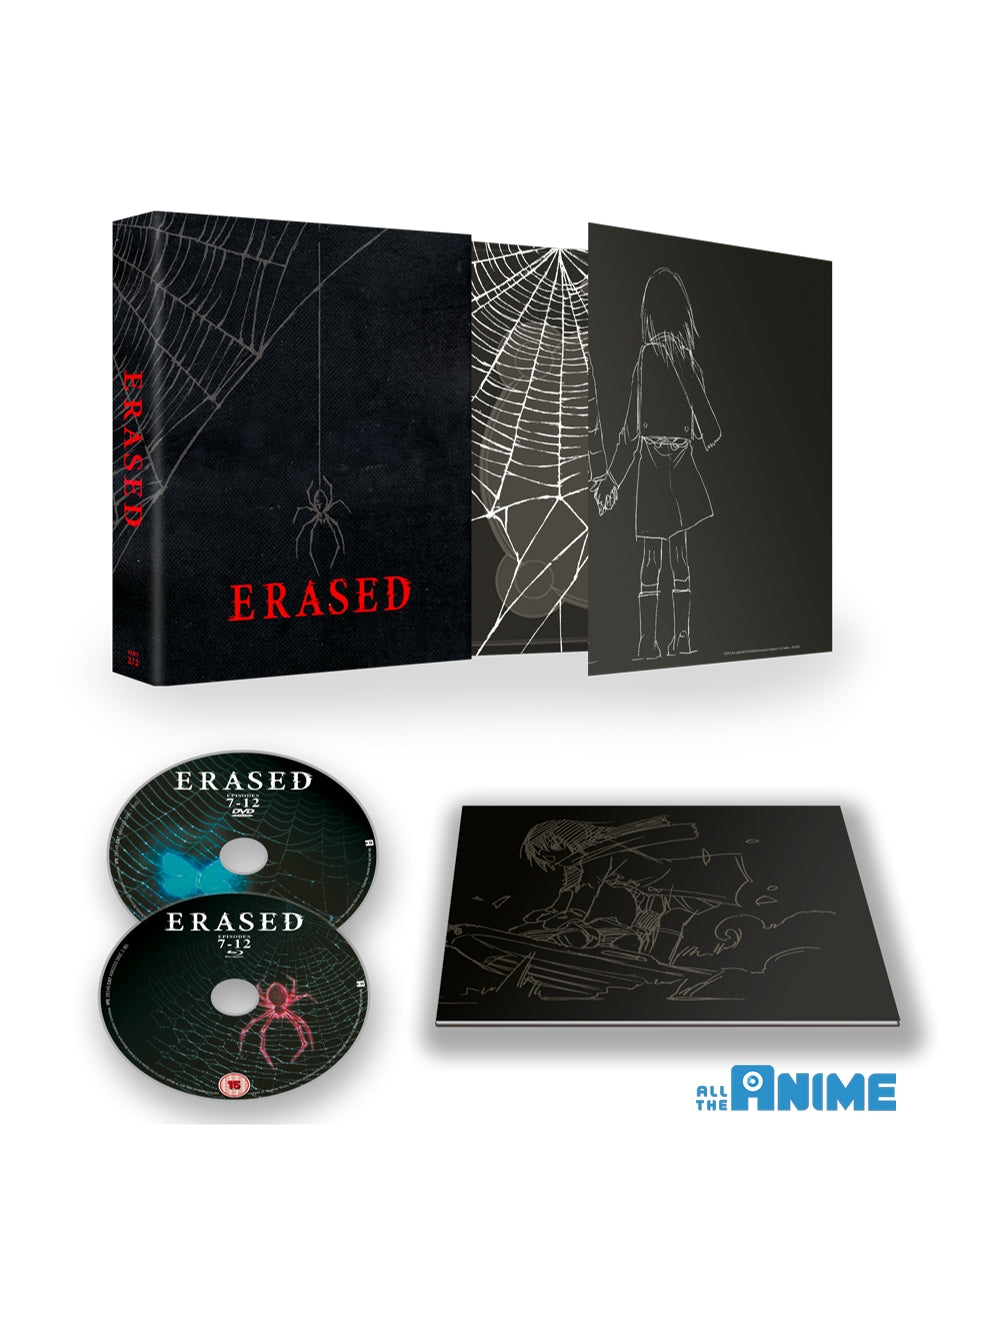 Buy ERASED DVD: Complete Edition - $14.99 at